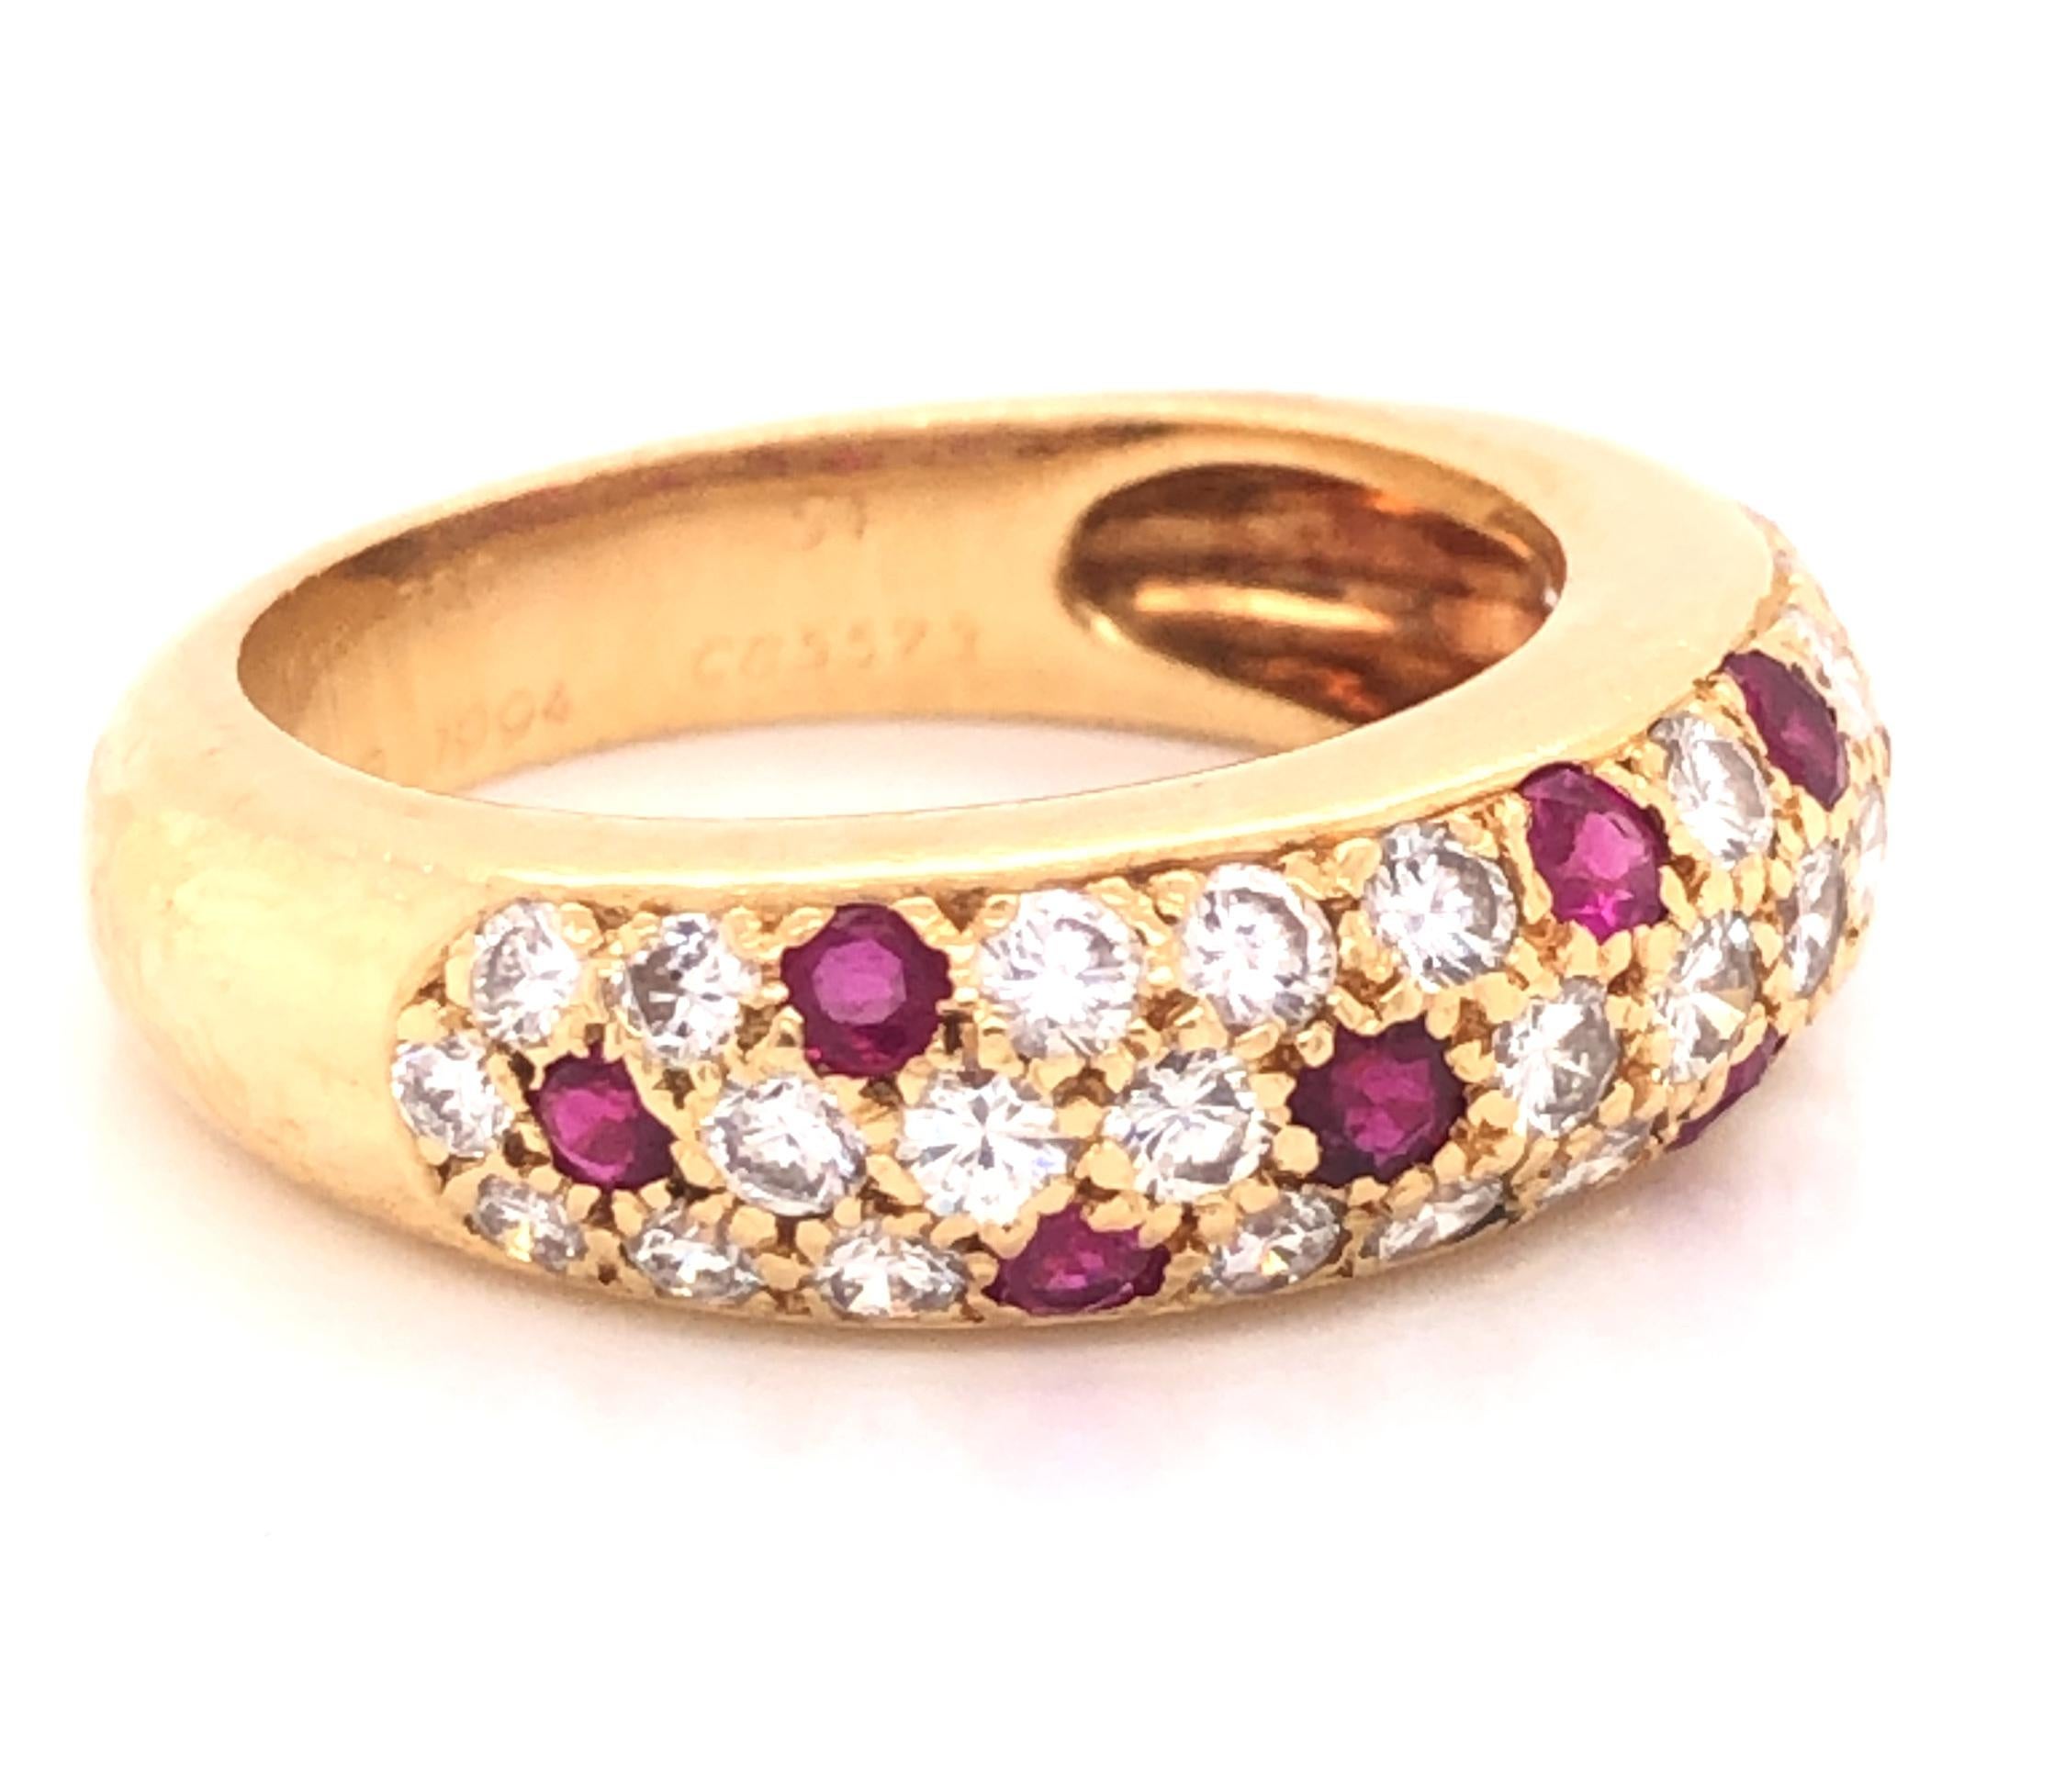 Beautiful design from famed jewelry house Cartier. This ring is crafted in 18k yellow gold, from the Mimi collection. Ring features approximately 1.00 tcw. of G/VS diamonds and rubies. The diamond and rubies set against the yellow gold truly pop off